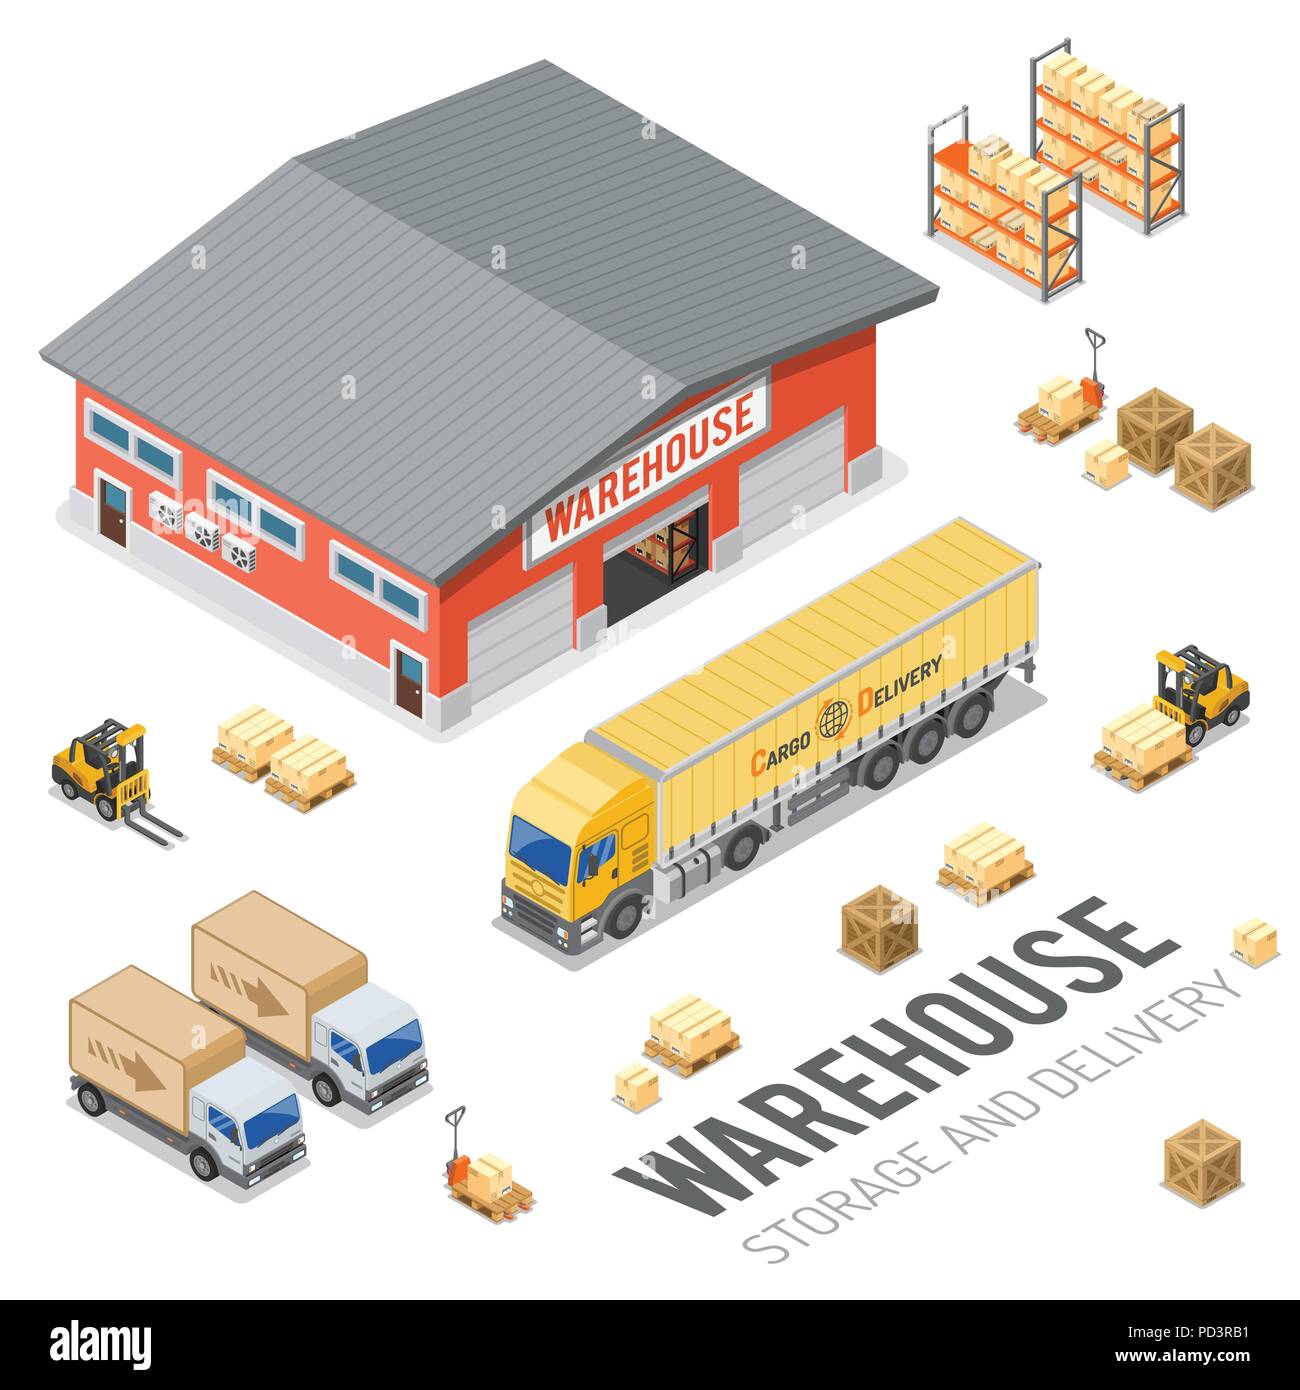 Warehouse Storage and Delivery Isometric Stock Vector